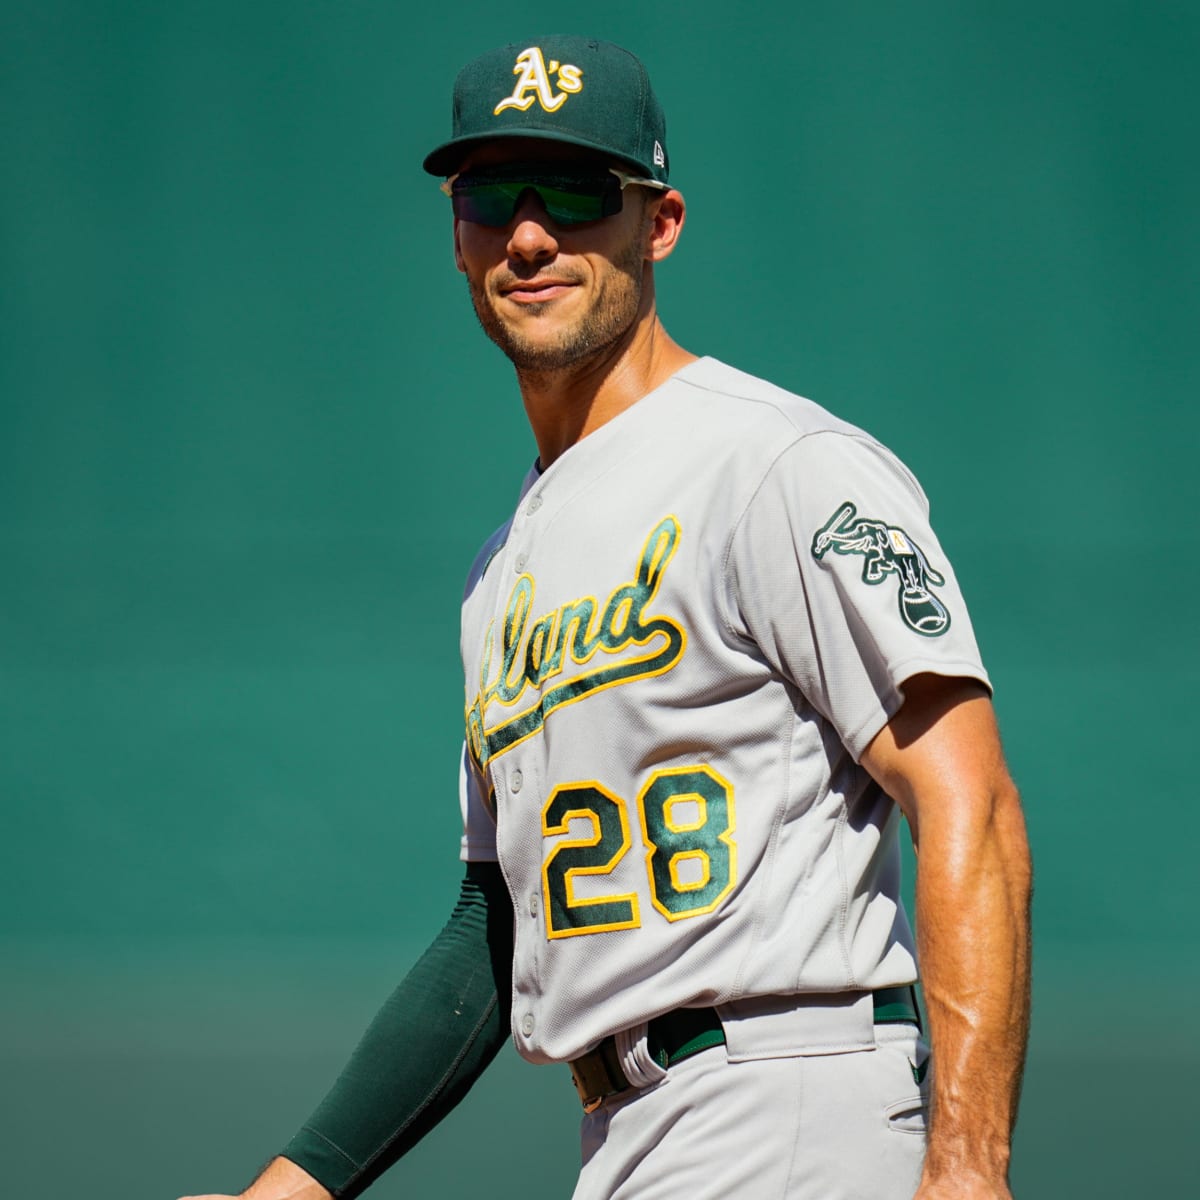 With Freeman a free agent, Braves get star 1B Olson from A's